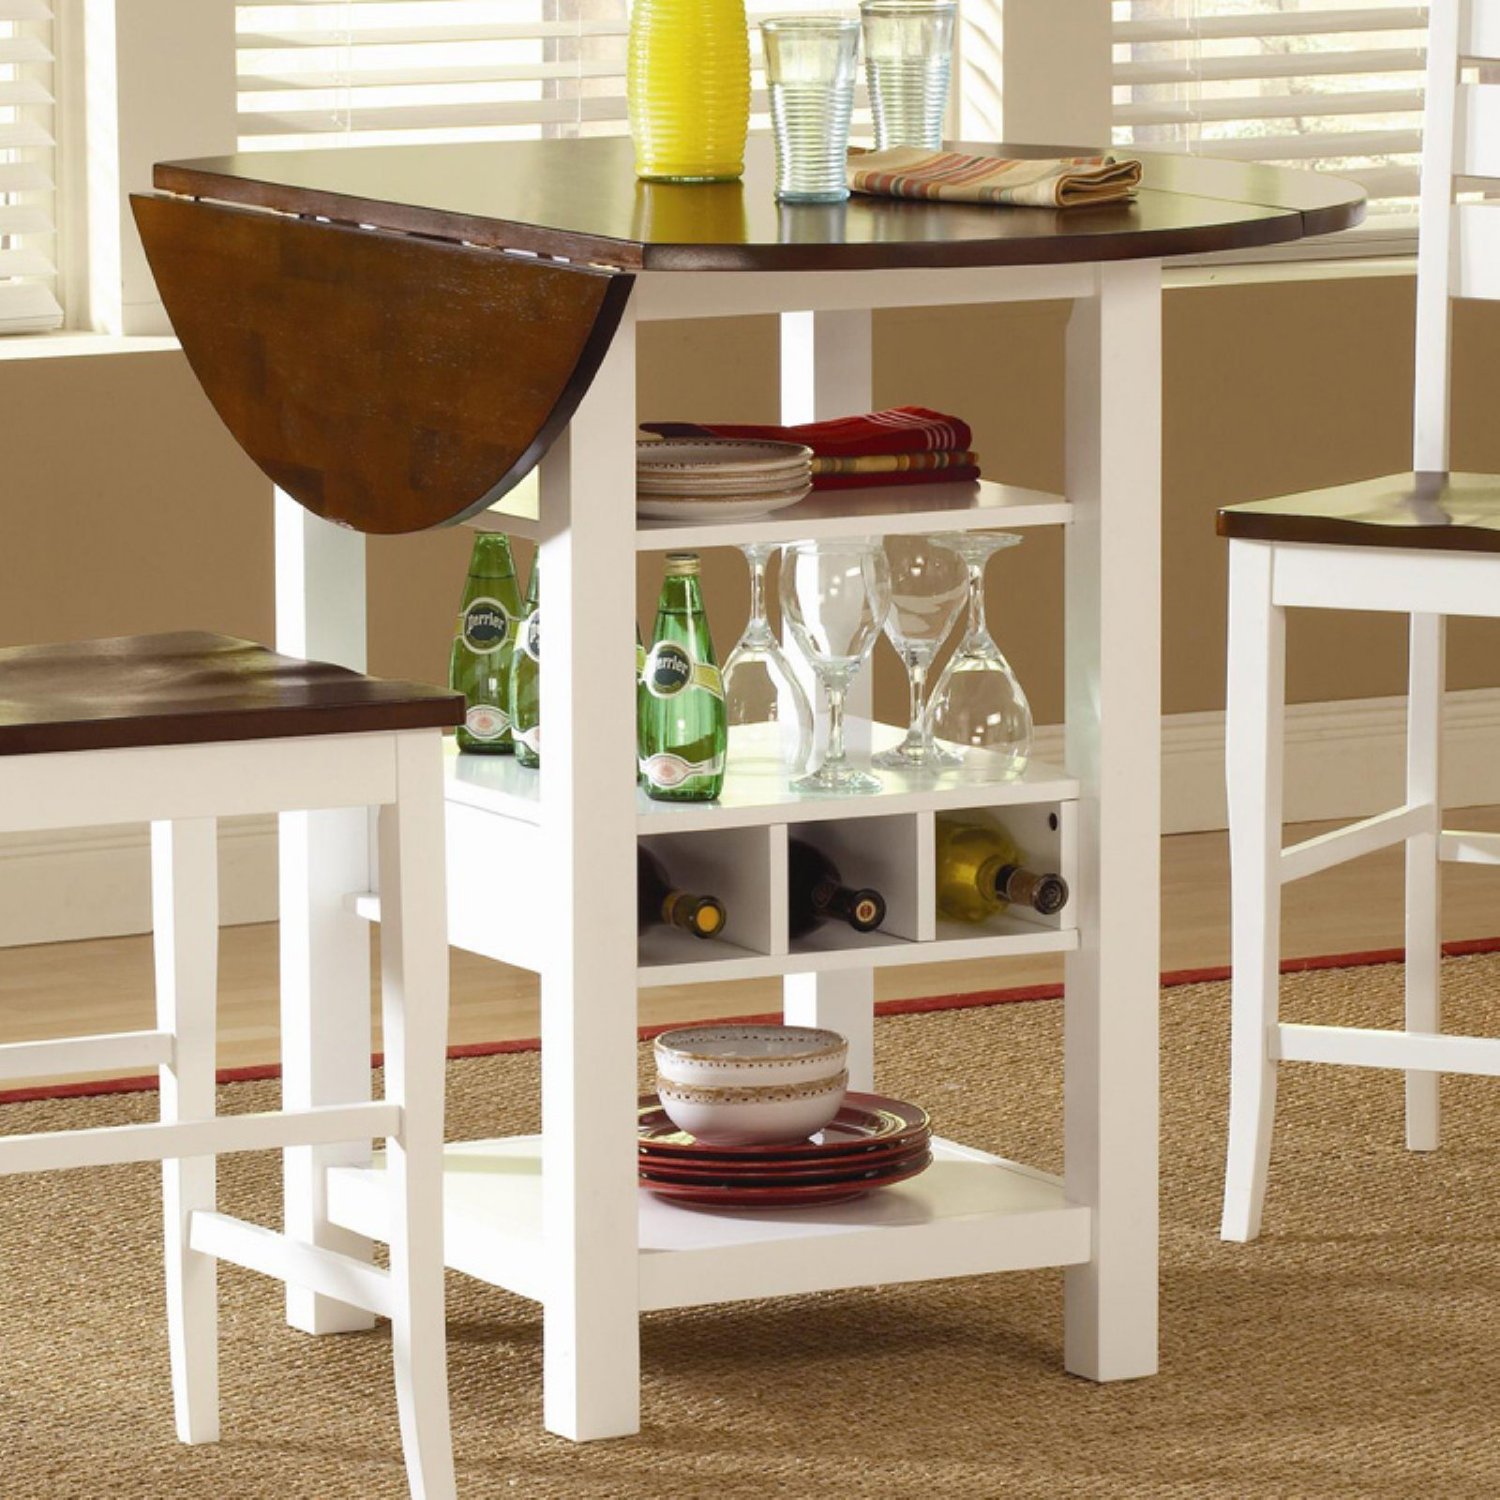 Unusual DIY Dining Room Storage Ideas on Simple Round Table in Small Open Dining Space with Attractive Chairs